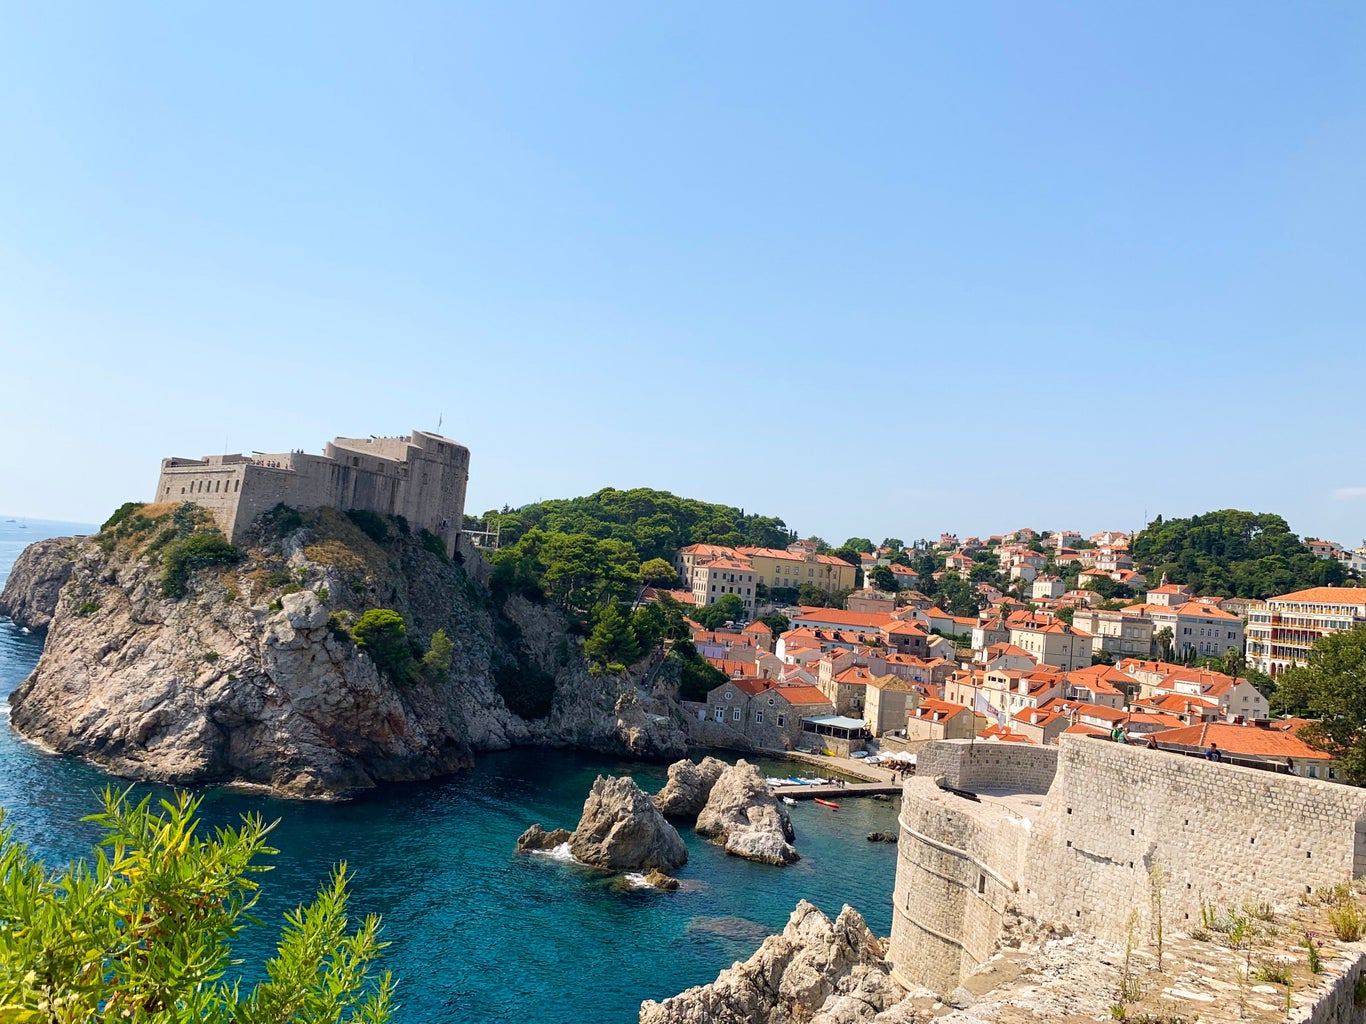 PIcture I took in Dubrovnik.